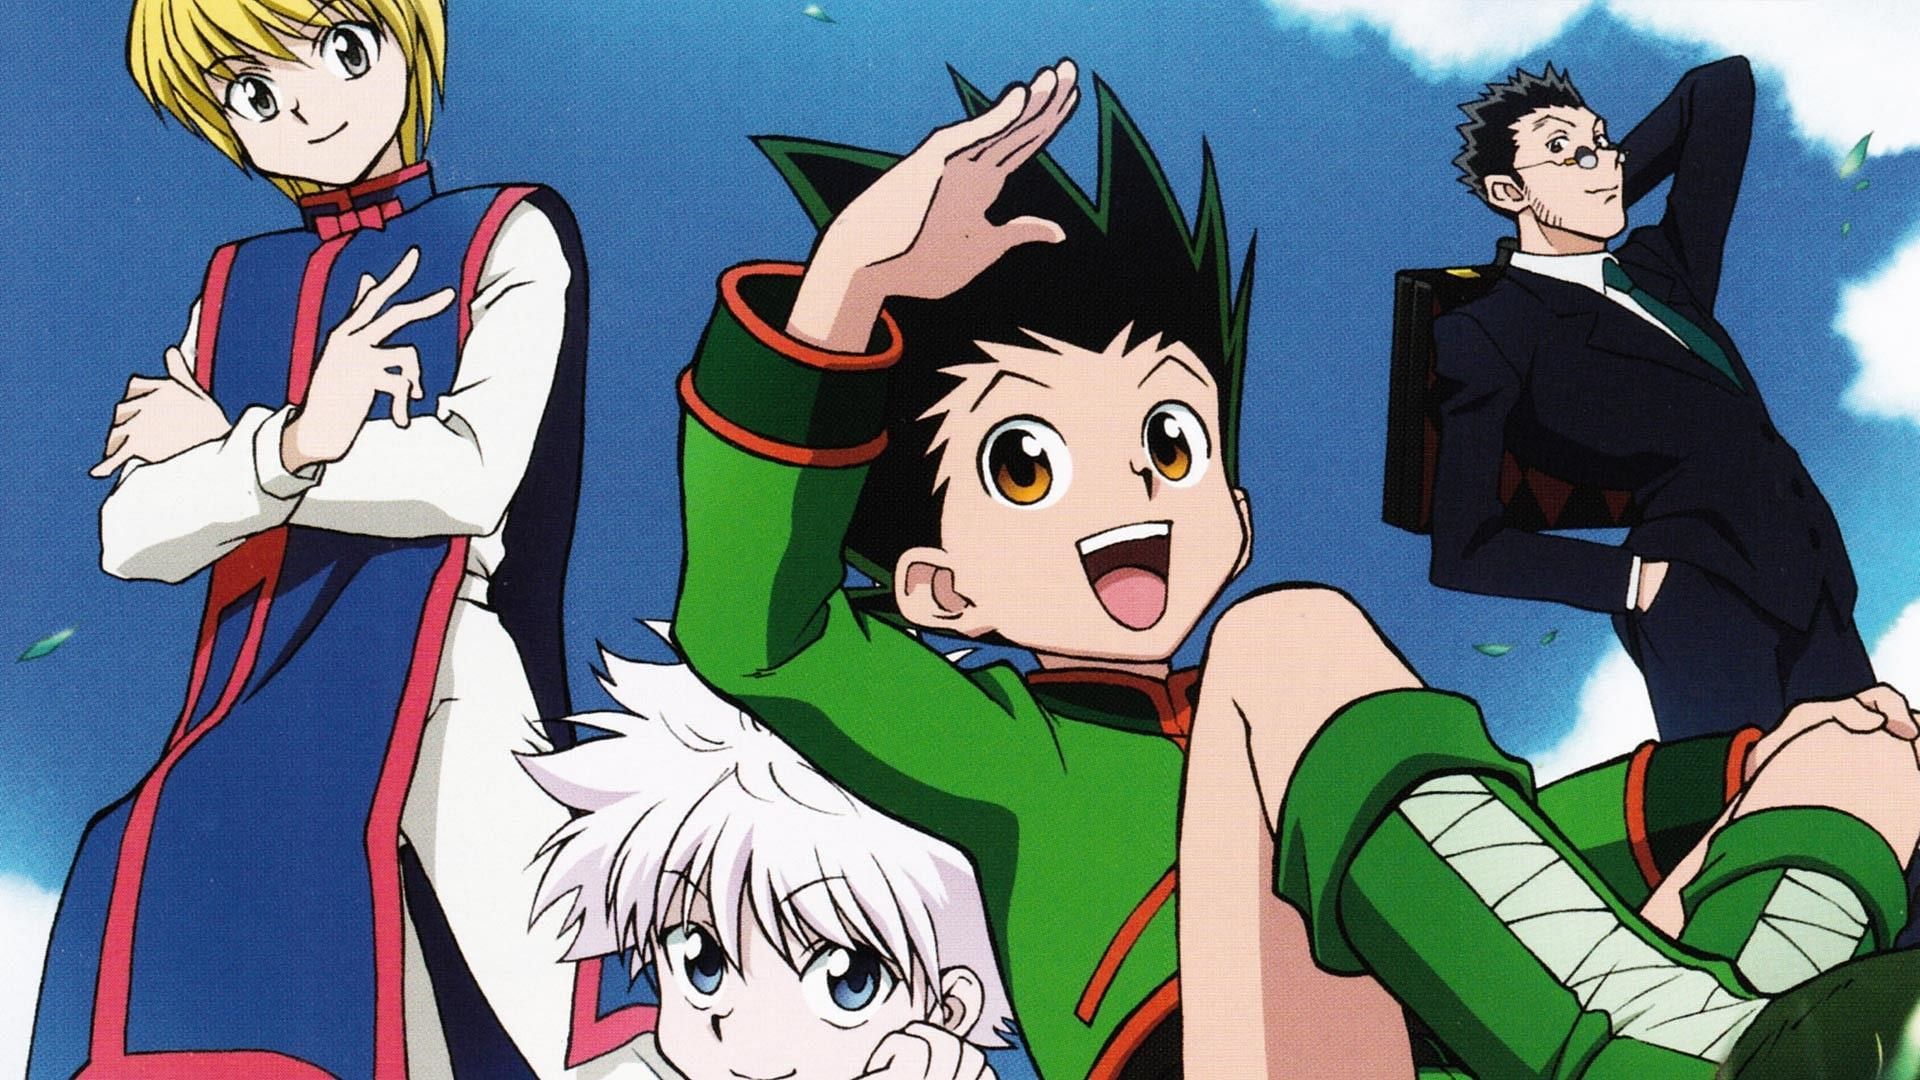 When is the Hunter x Hunter manga official release date?